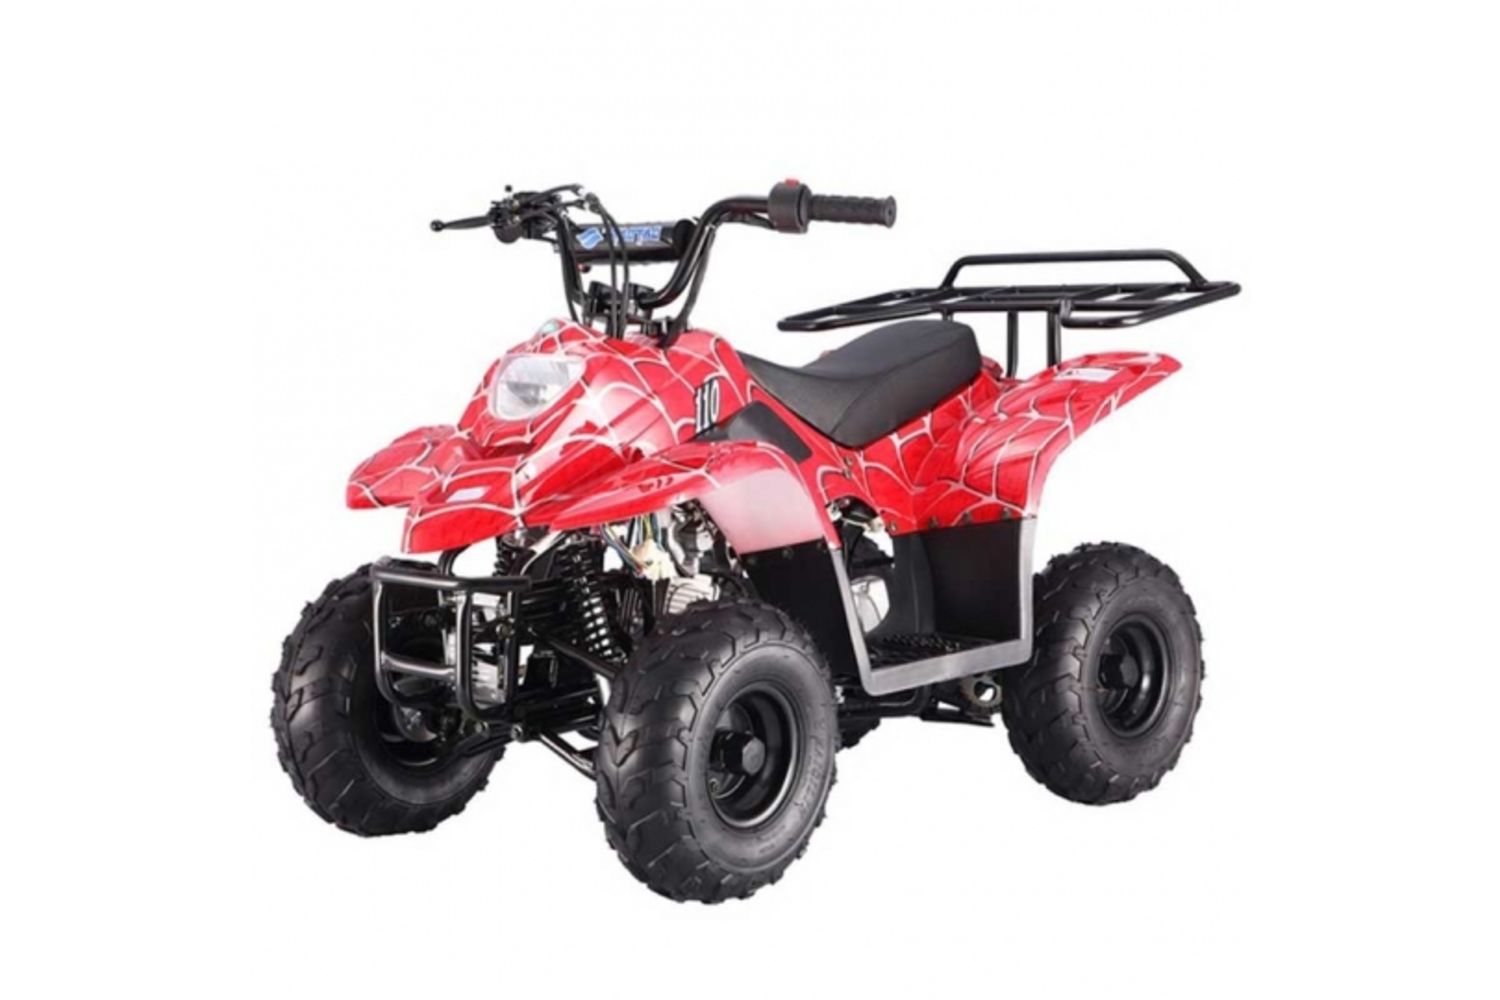 Brand New Quad Bikes, Dirt Bikes & Tools: Engines in a Range of Sizes from 50 cc to 125 cc, Plus Professional Tool Kits & Cabinets